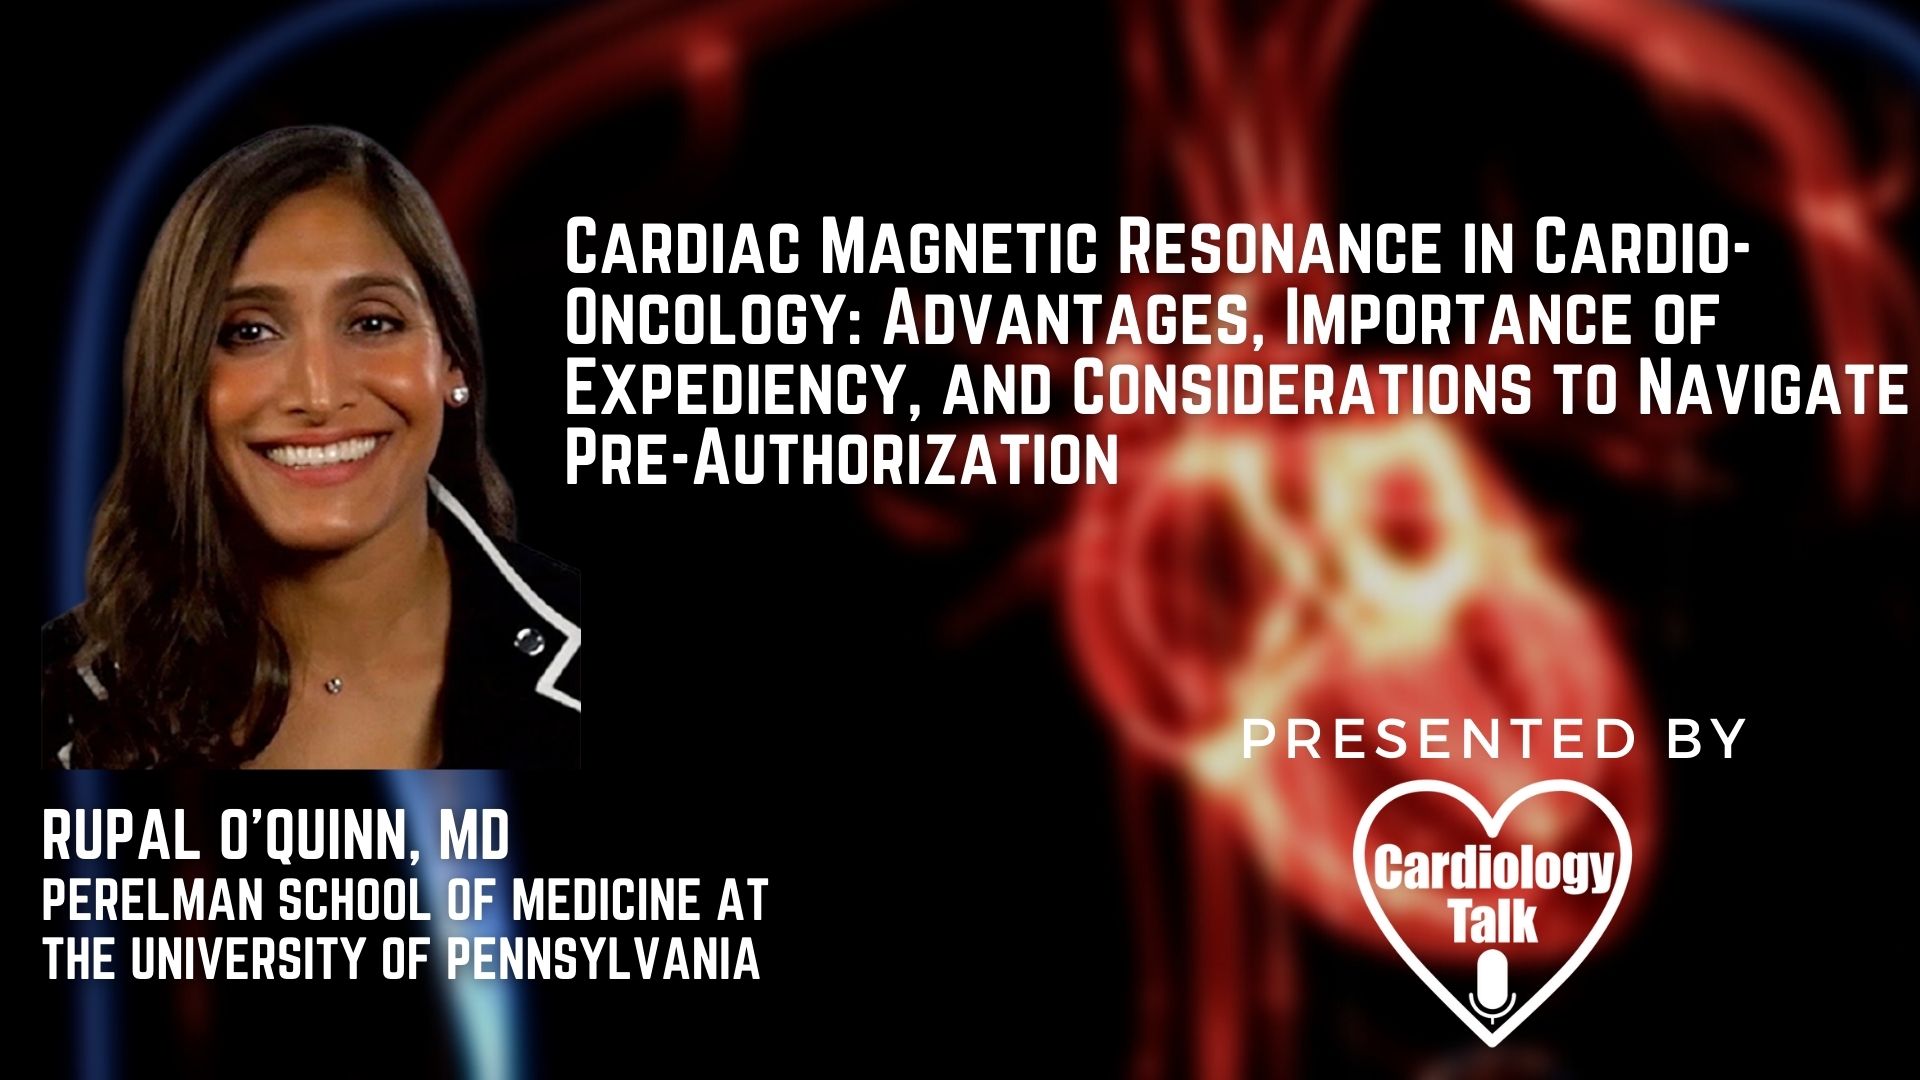 Dr. Rupal O’Quinn- Cardiac Magnetic Resonance in Cardio-Oncology: Advantages, Importance of Expediency, and Considerations to Navigate Pre-Authorization  @RupalOQuinn @VicFerrariMD @DrR...